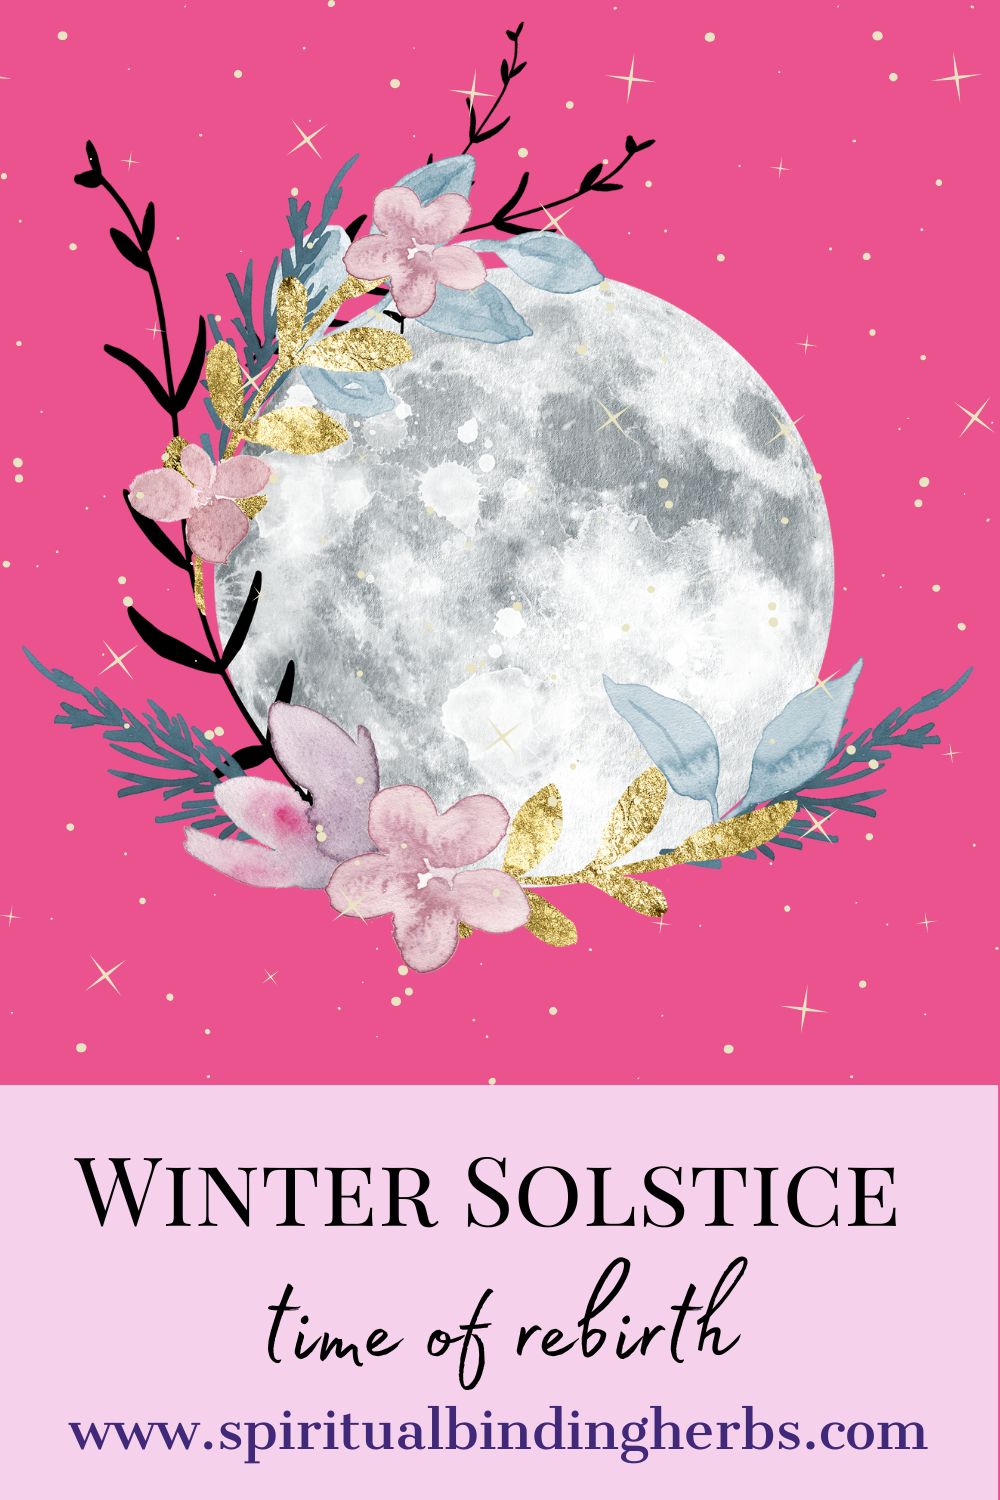 How To Celebrate The Winter Solstice